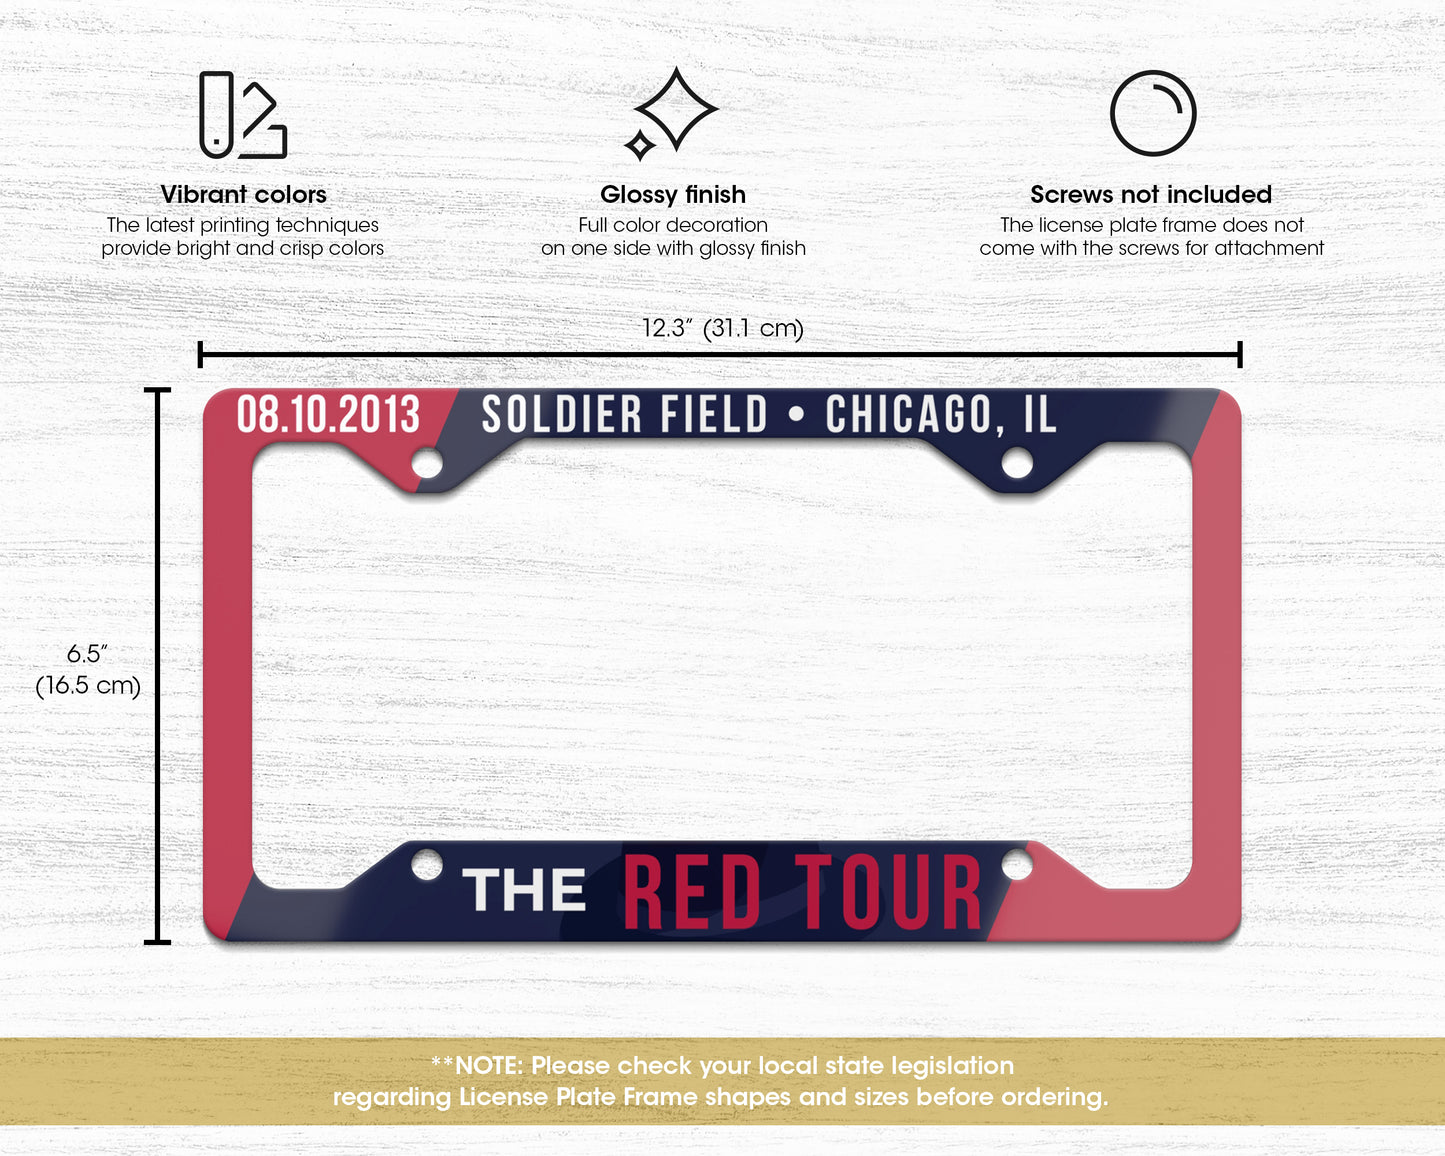 The Red Tour license plate frame